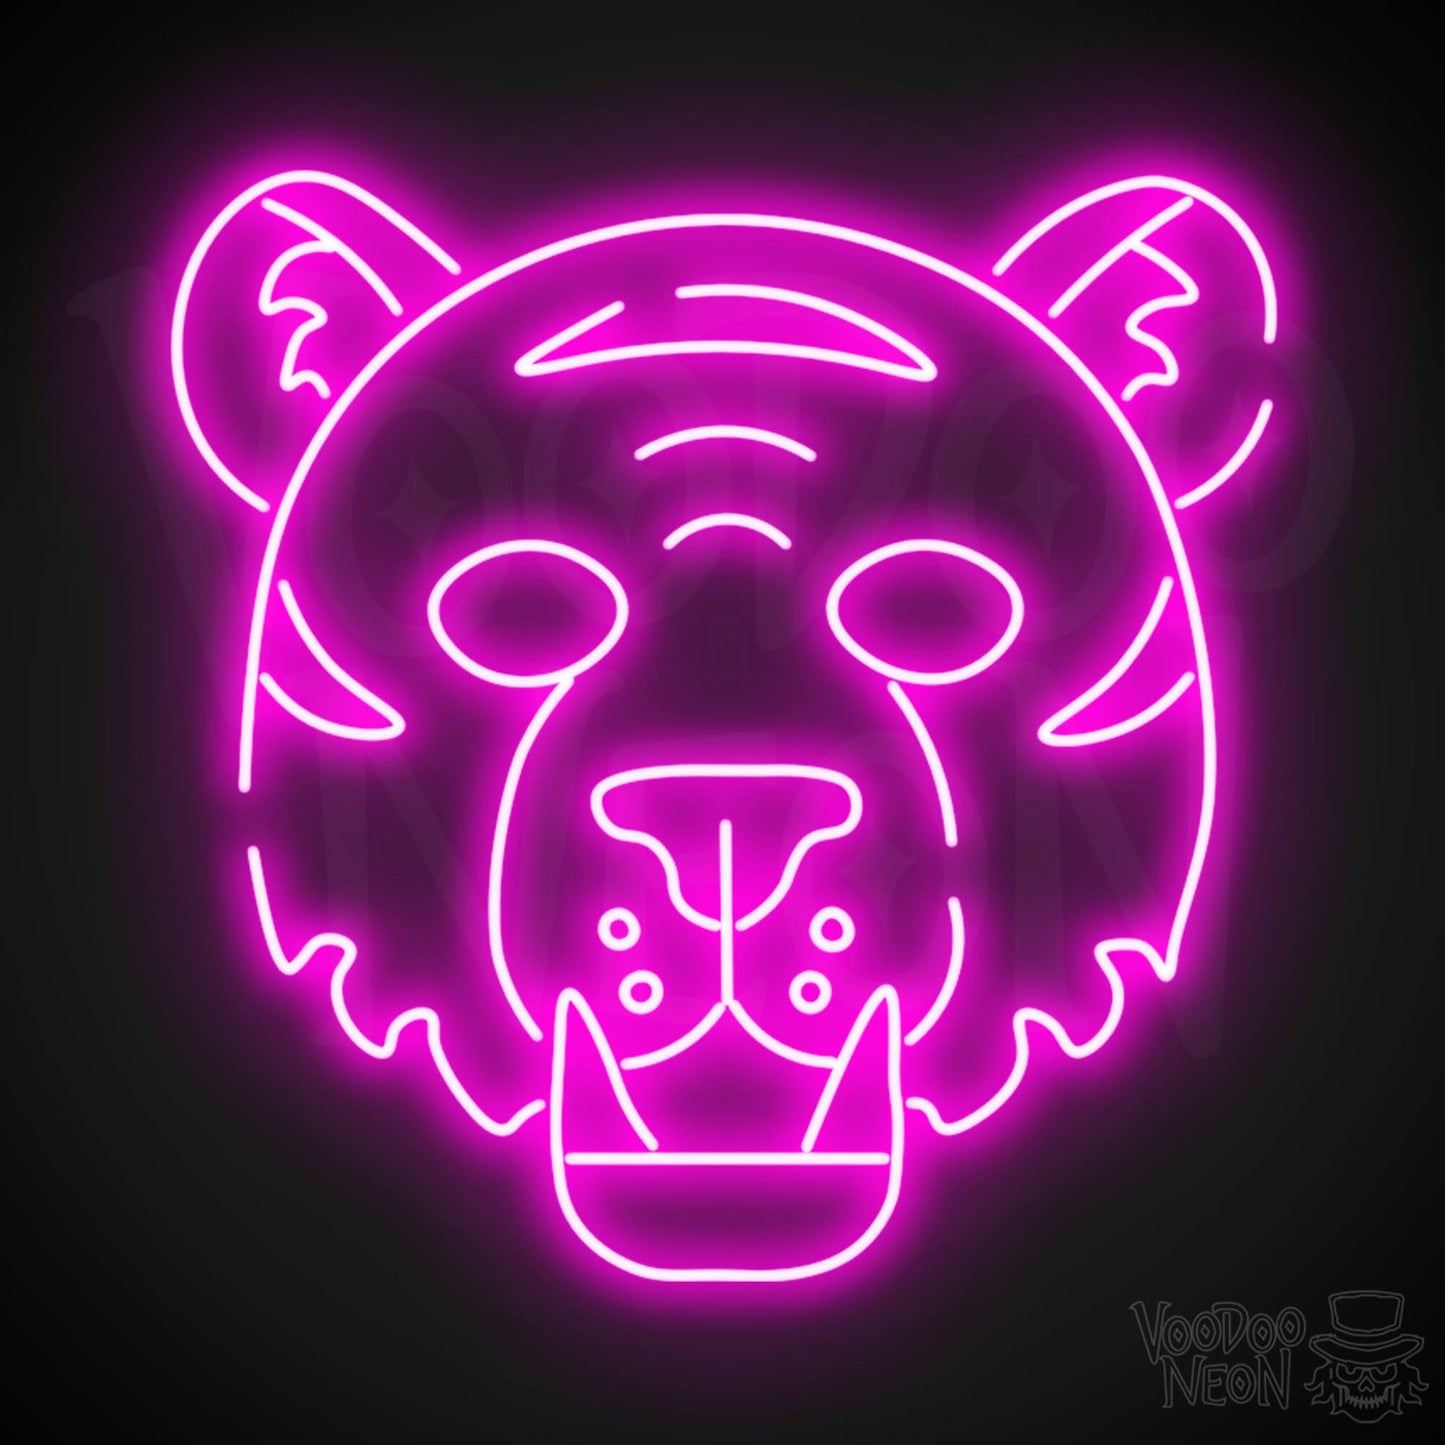 Neon Tiger Wall Art - Neon Tiger Sign - Tiger Neon Sign - LED Sign - Color Pink